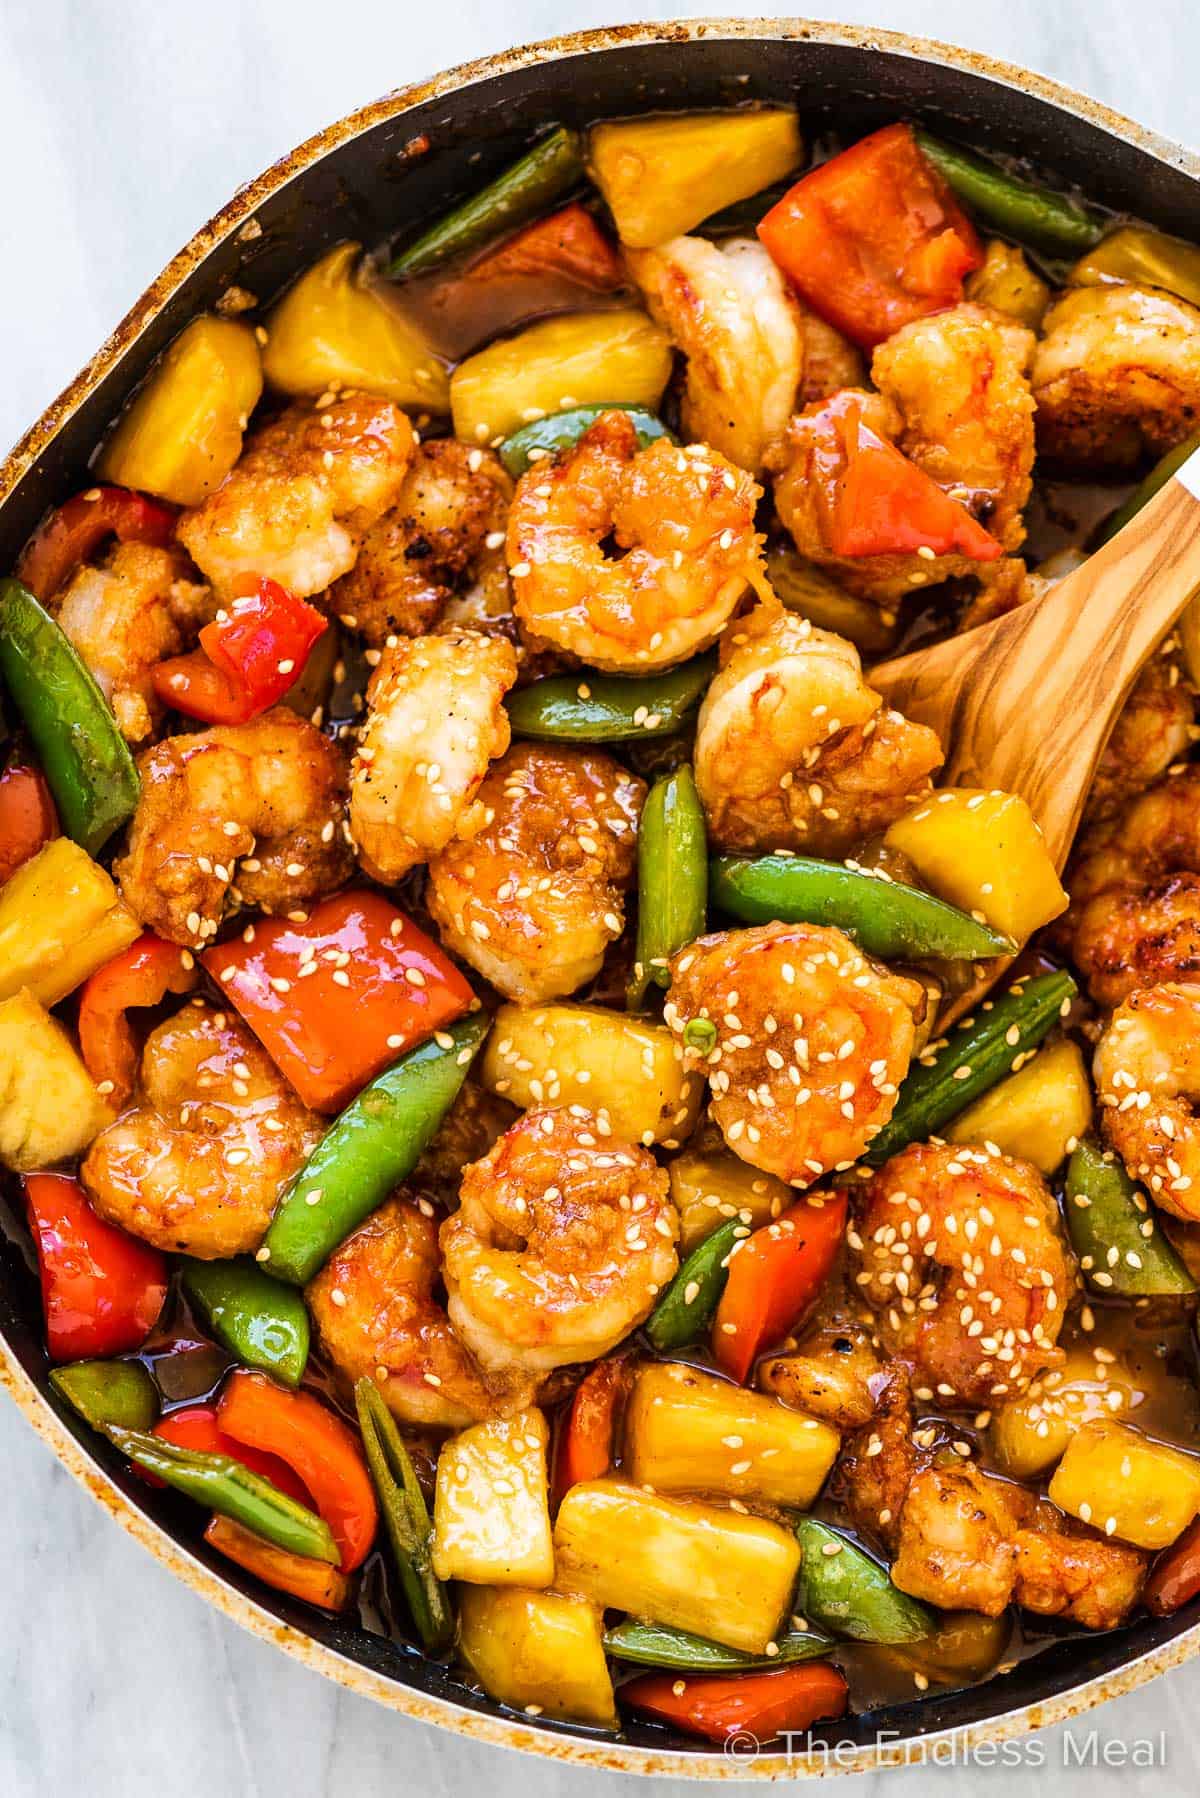 A frying and filled with pineapple shrimp stir fry and lots of veggies.